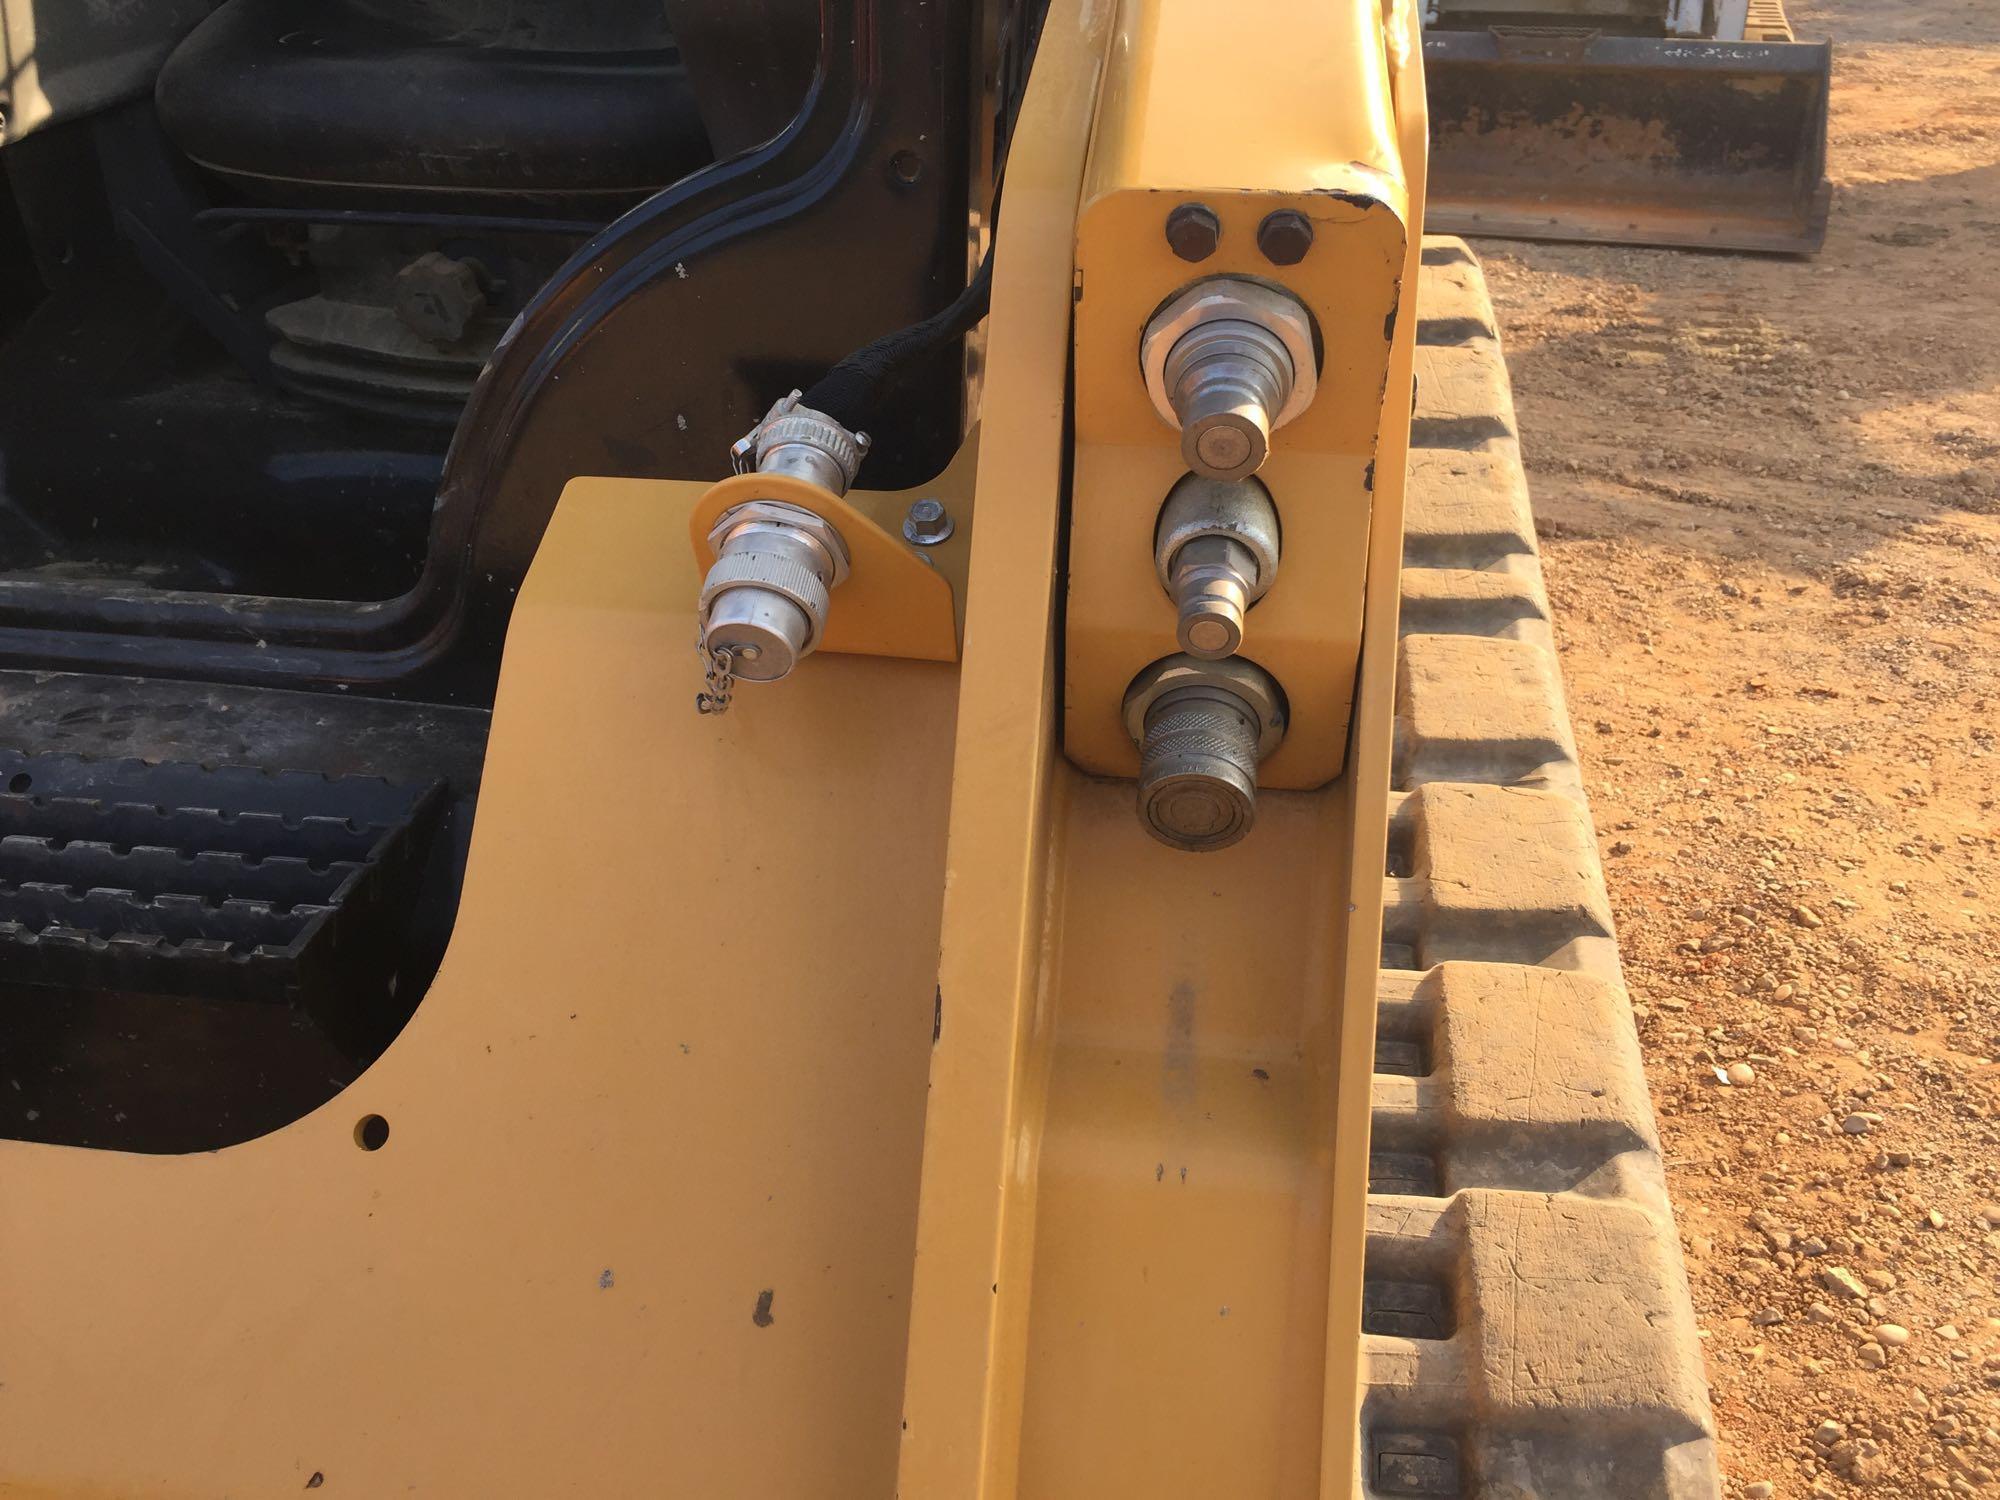 2014 CAT 259D MULTI TERRAIN LOADER, OROPS, RUBBER TRACKS, 2 SPEED, AUX HYDRAULICS, MANUAL COUPLER,